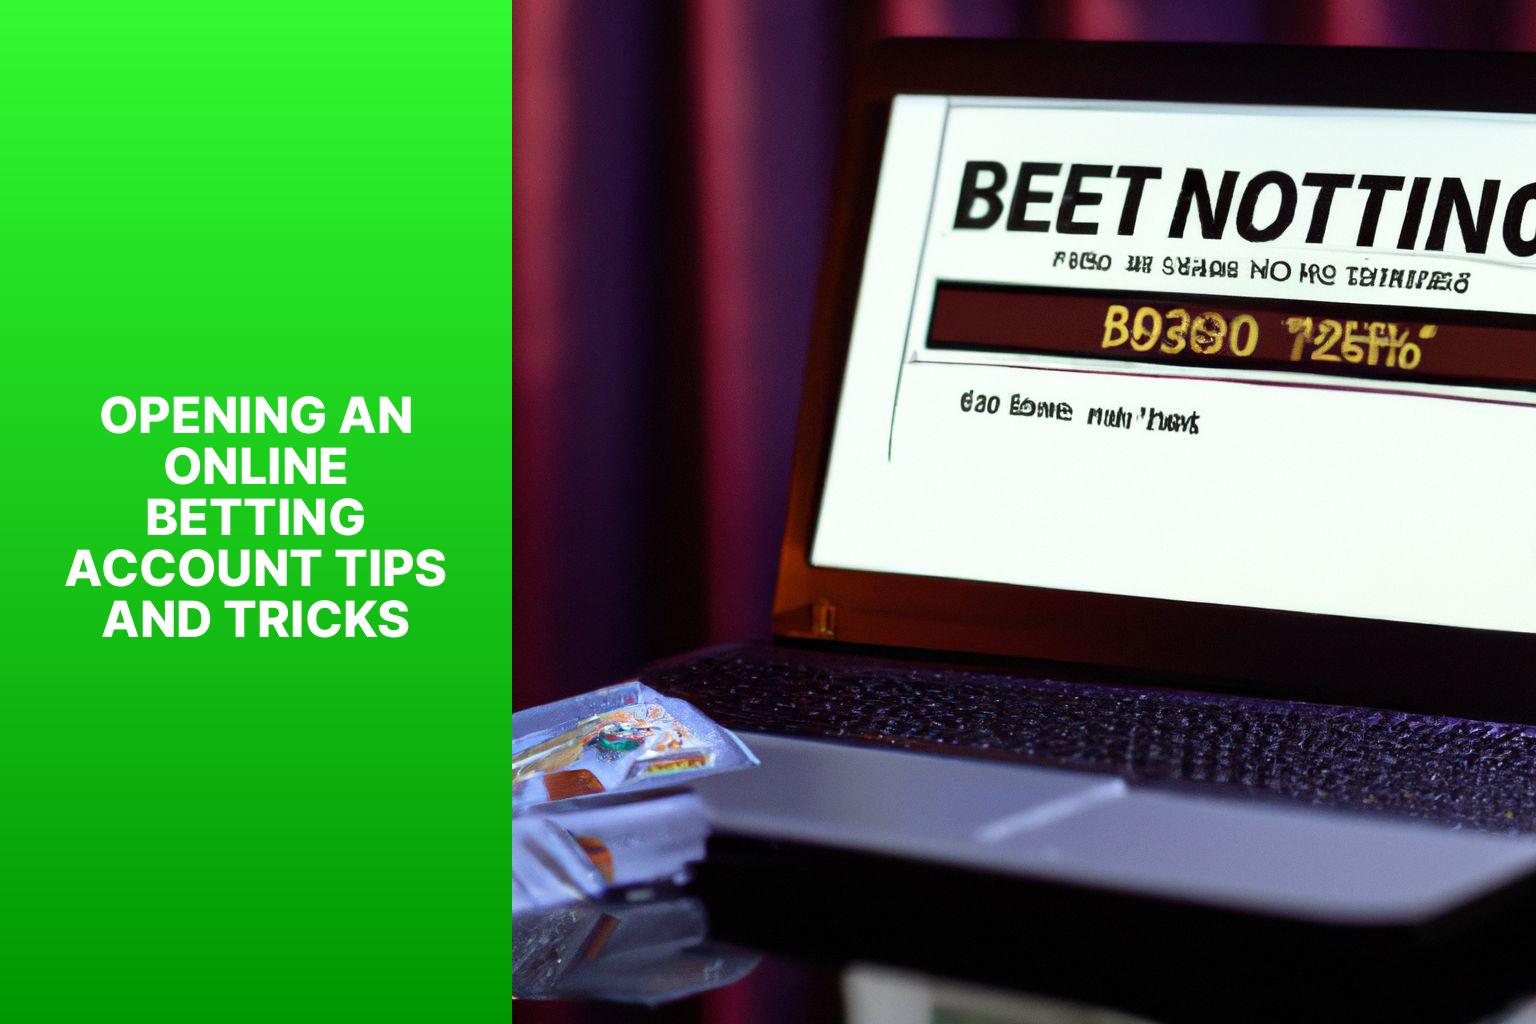 Opening an Online Betting Account Tips and Tricks